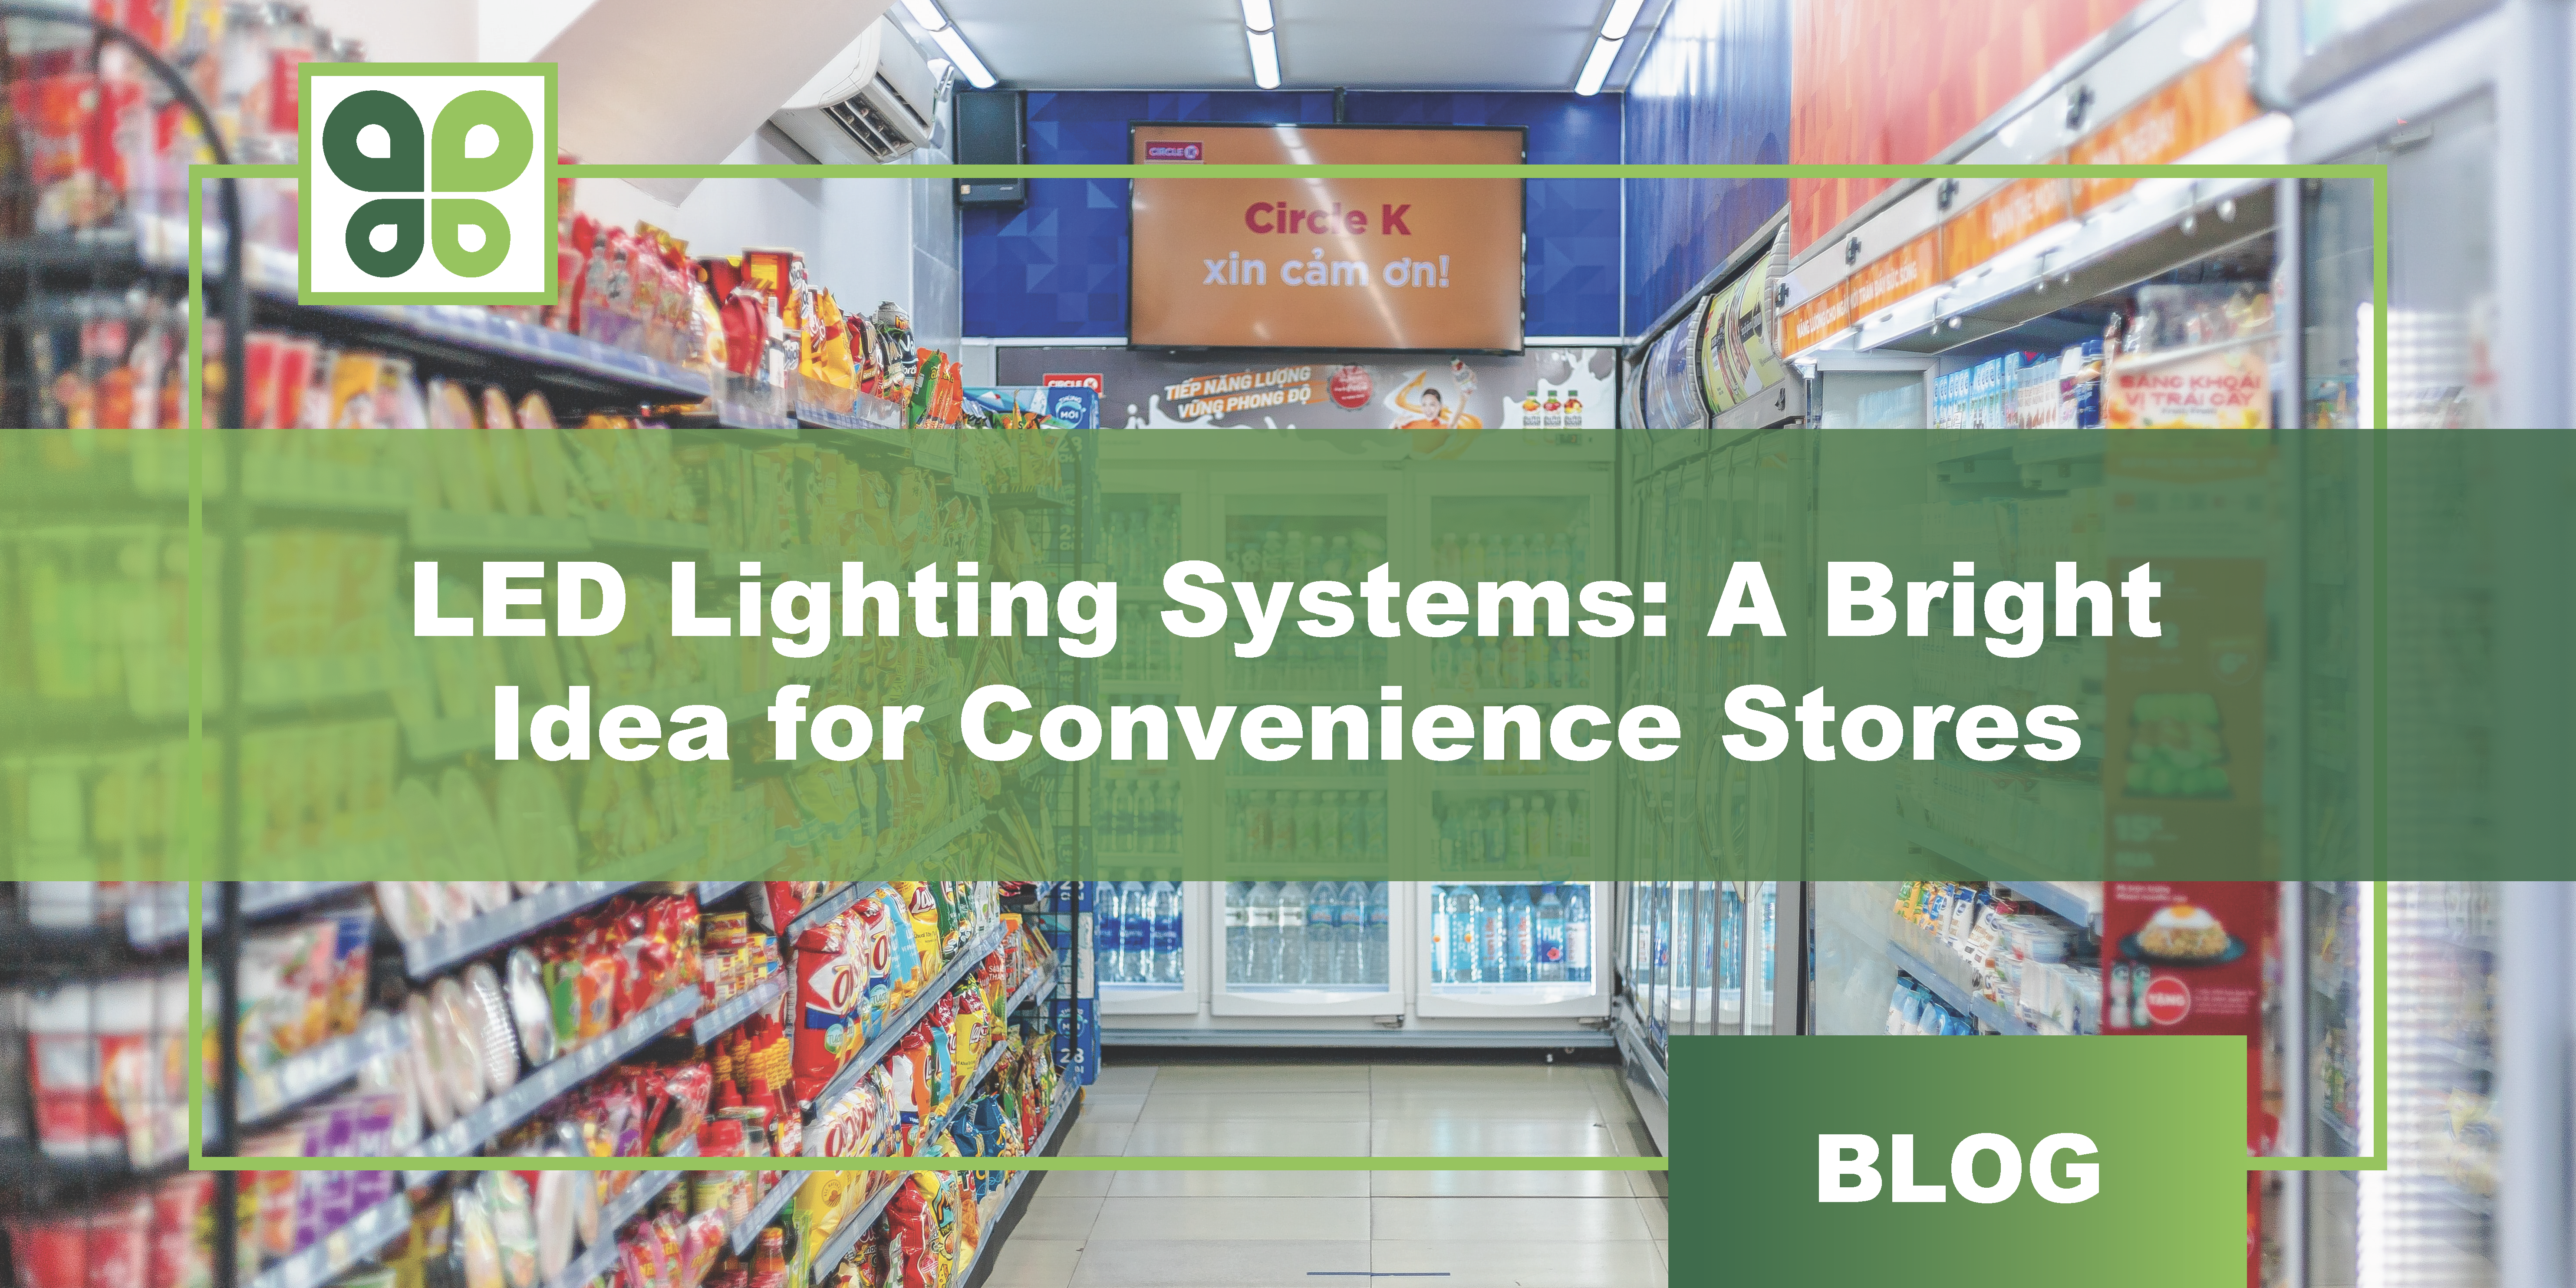 LED Lighting System: A Bright Idea for Convenience Stores